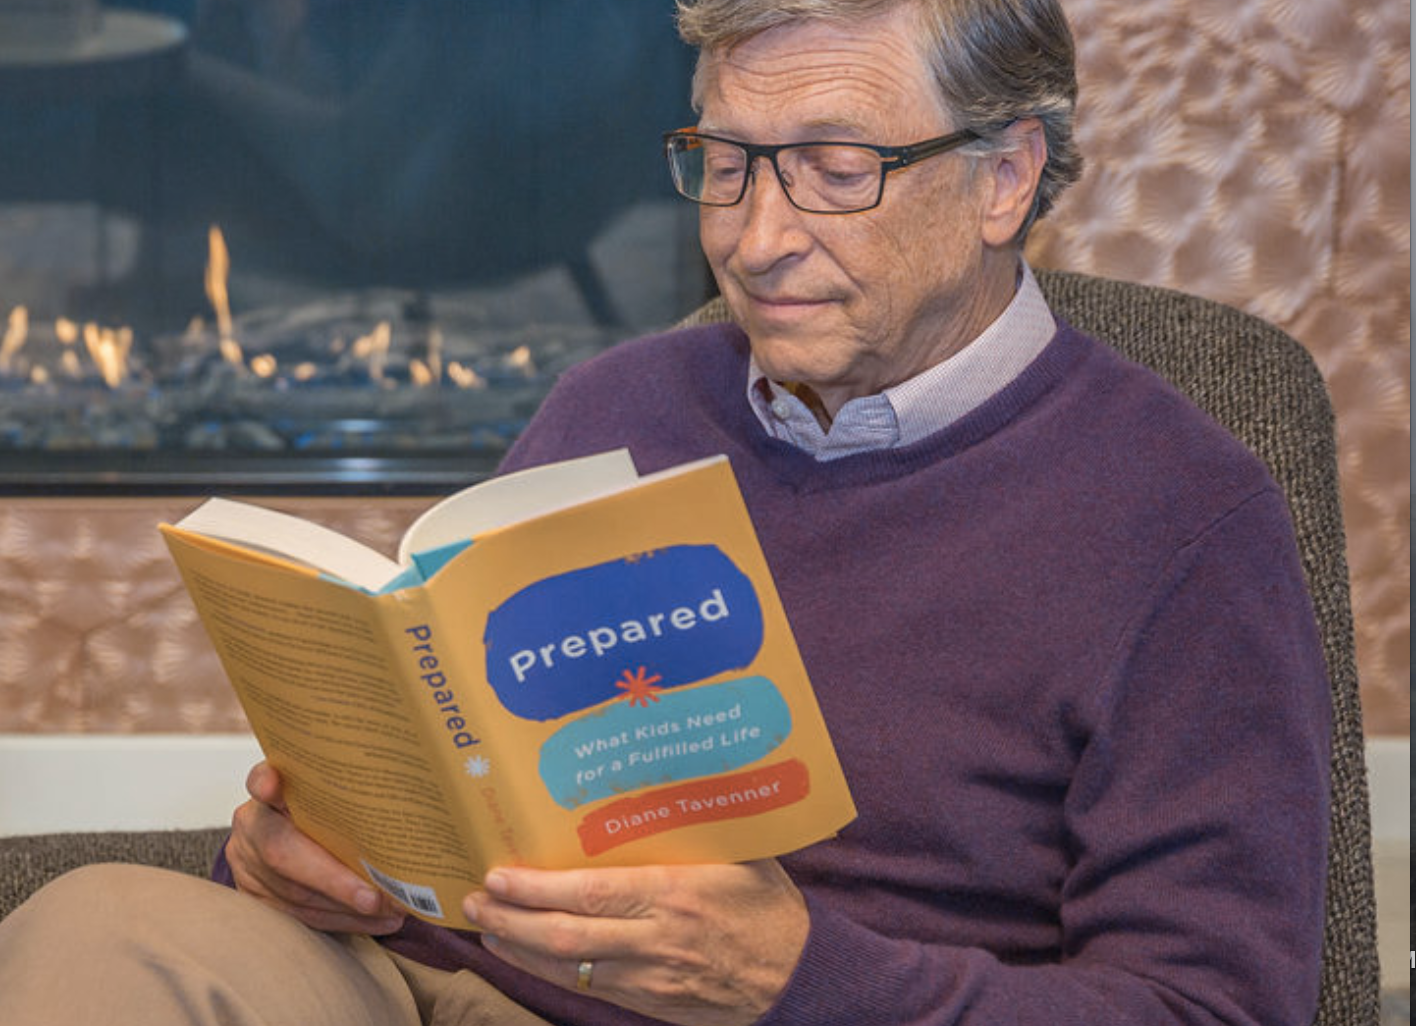 Bill Gates names ‘Prepared’ as one of the best books of 2019!